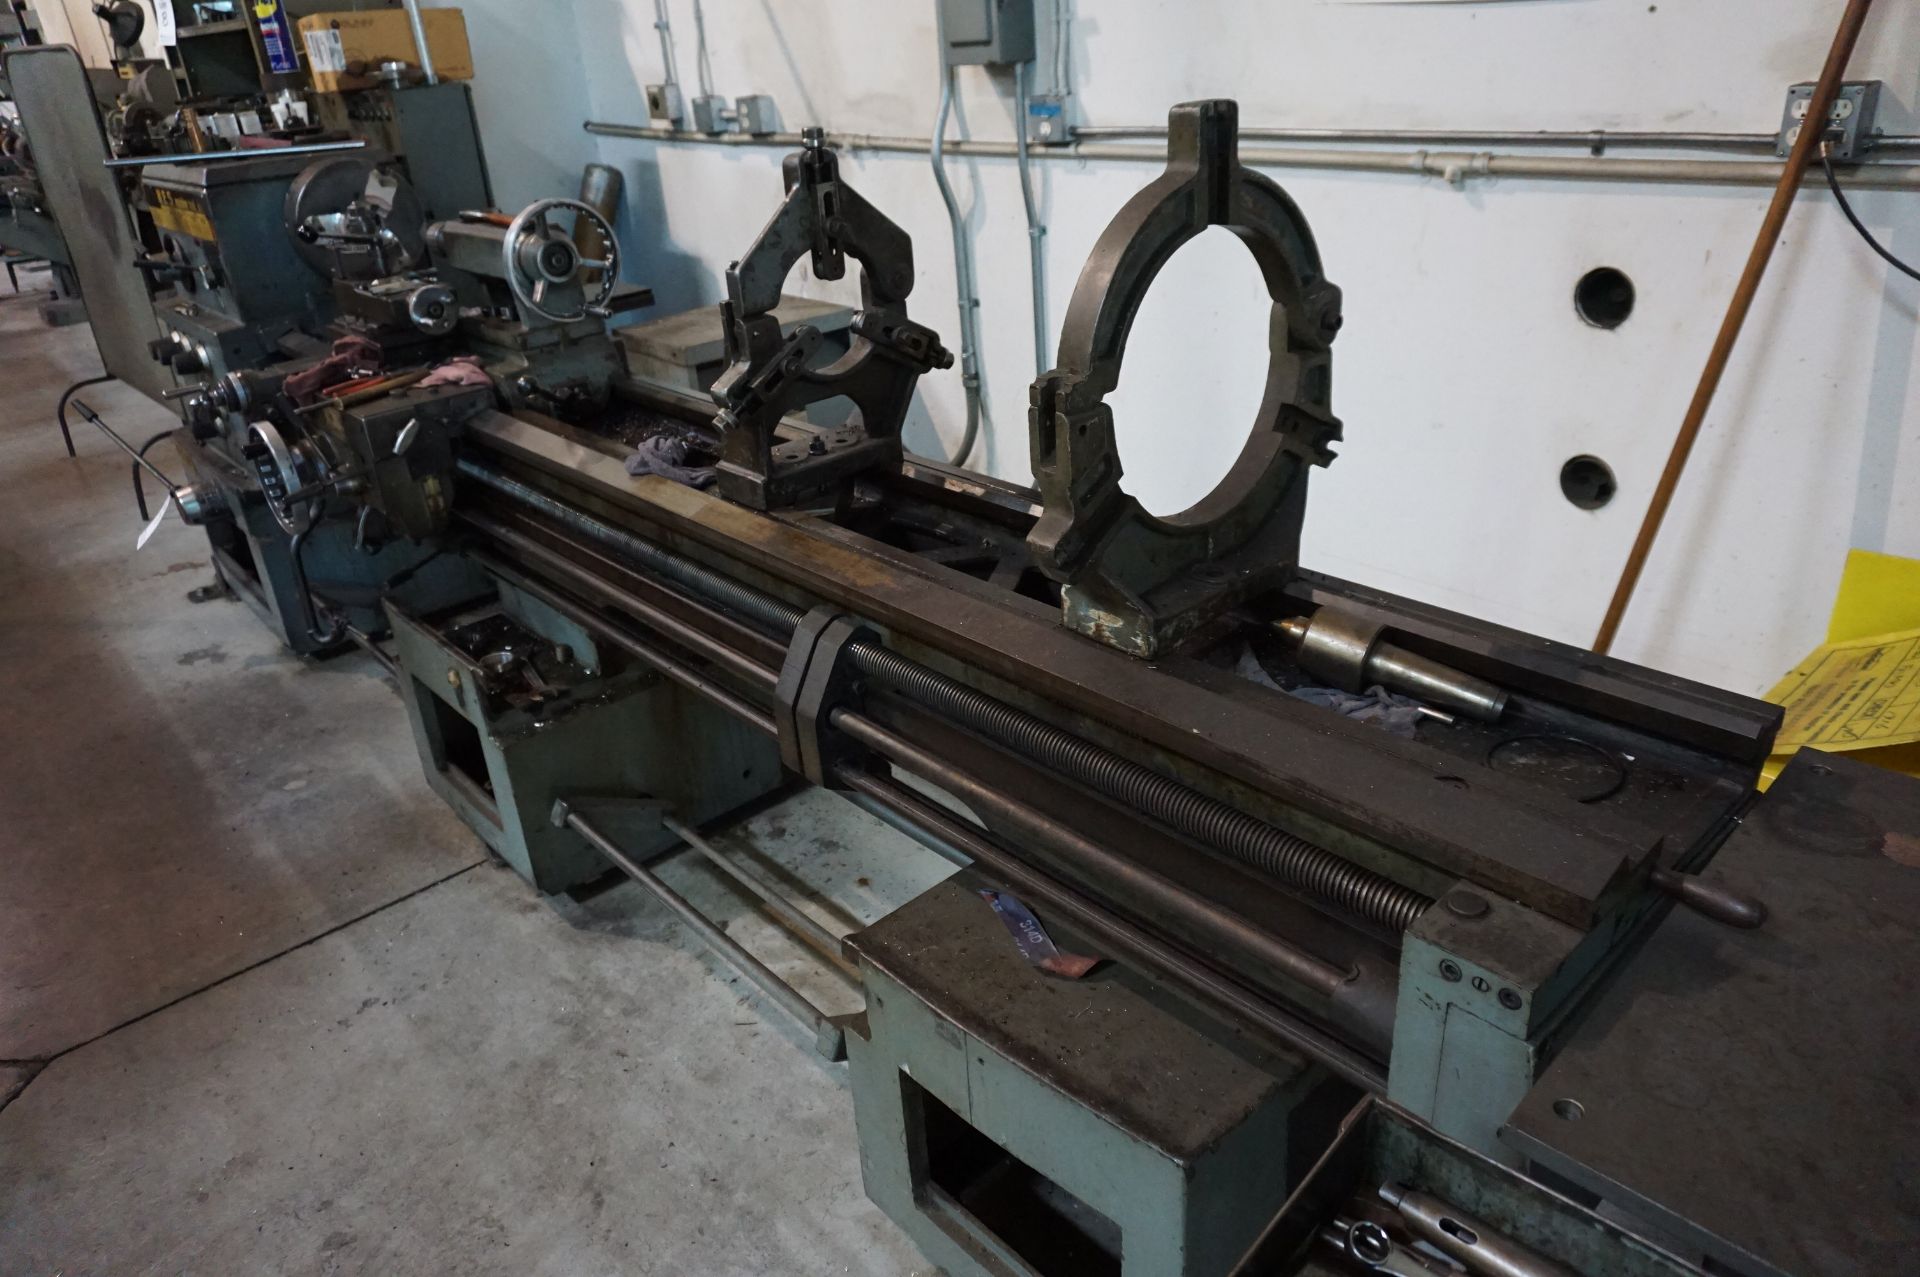 1970 H.E.S. MACHINE LATHE 20" X 80", MODEL 550, S/N 11540 WITH 10" CHUCK, KEYED CHUCK ON TAILSTOCK - Image 2 of 10